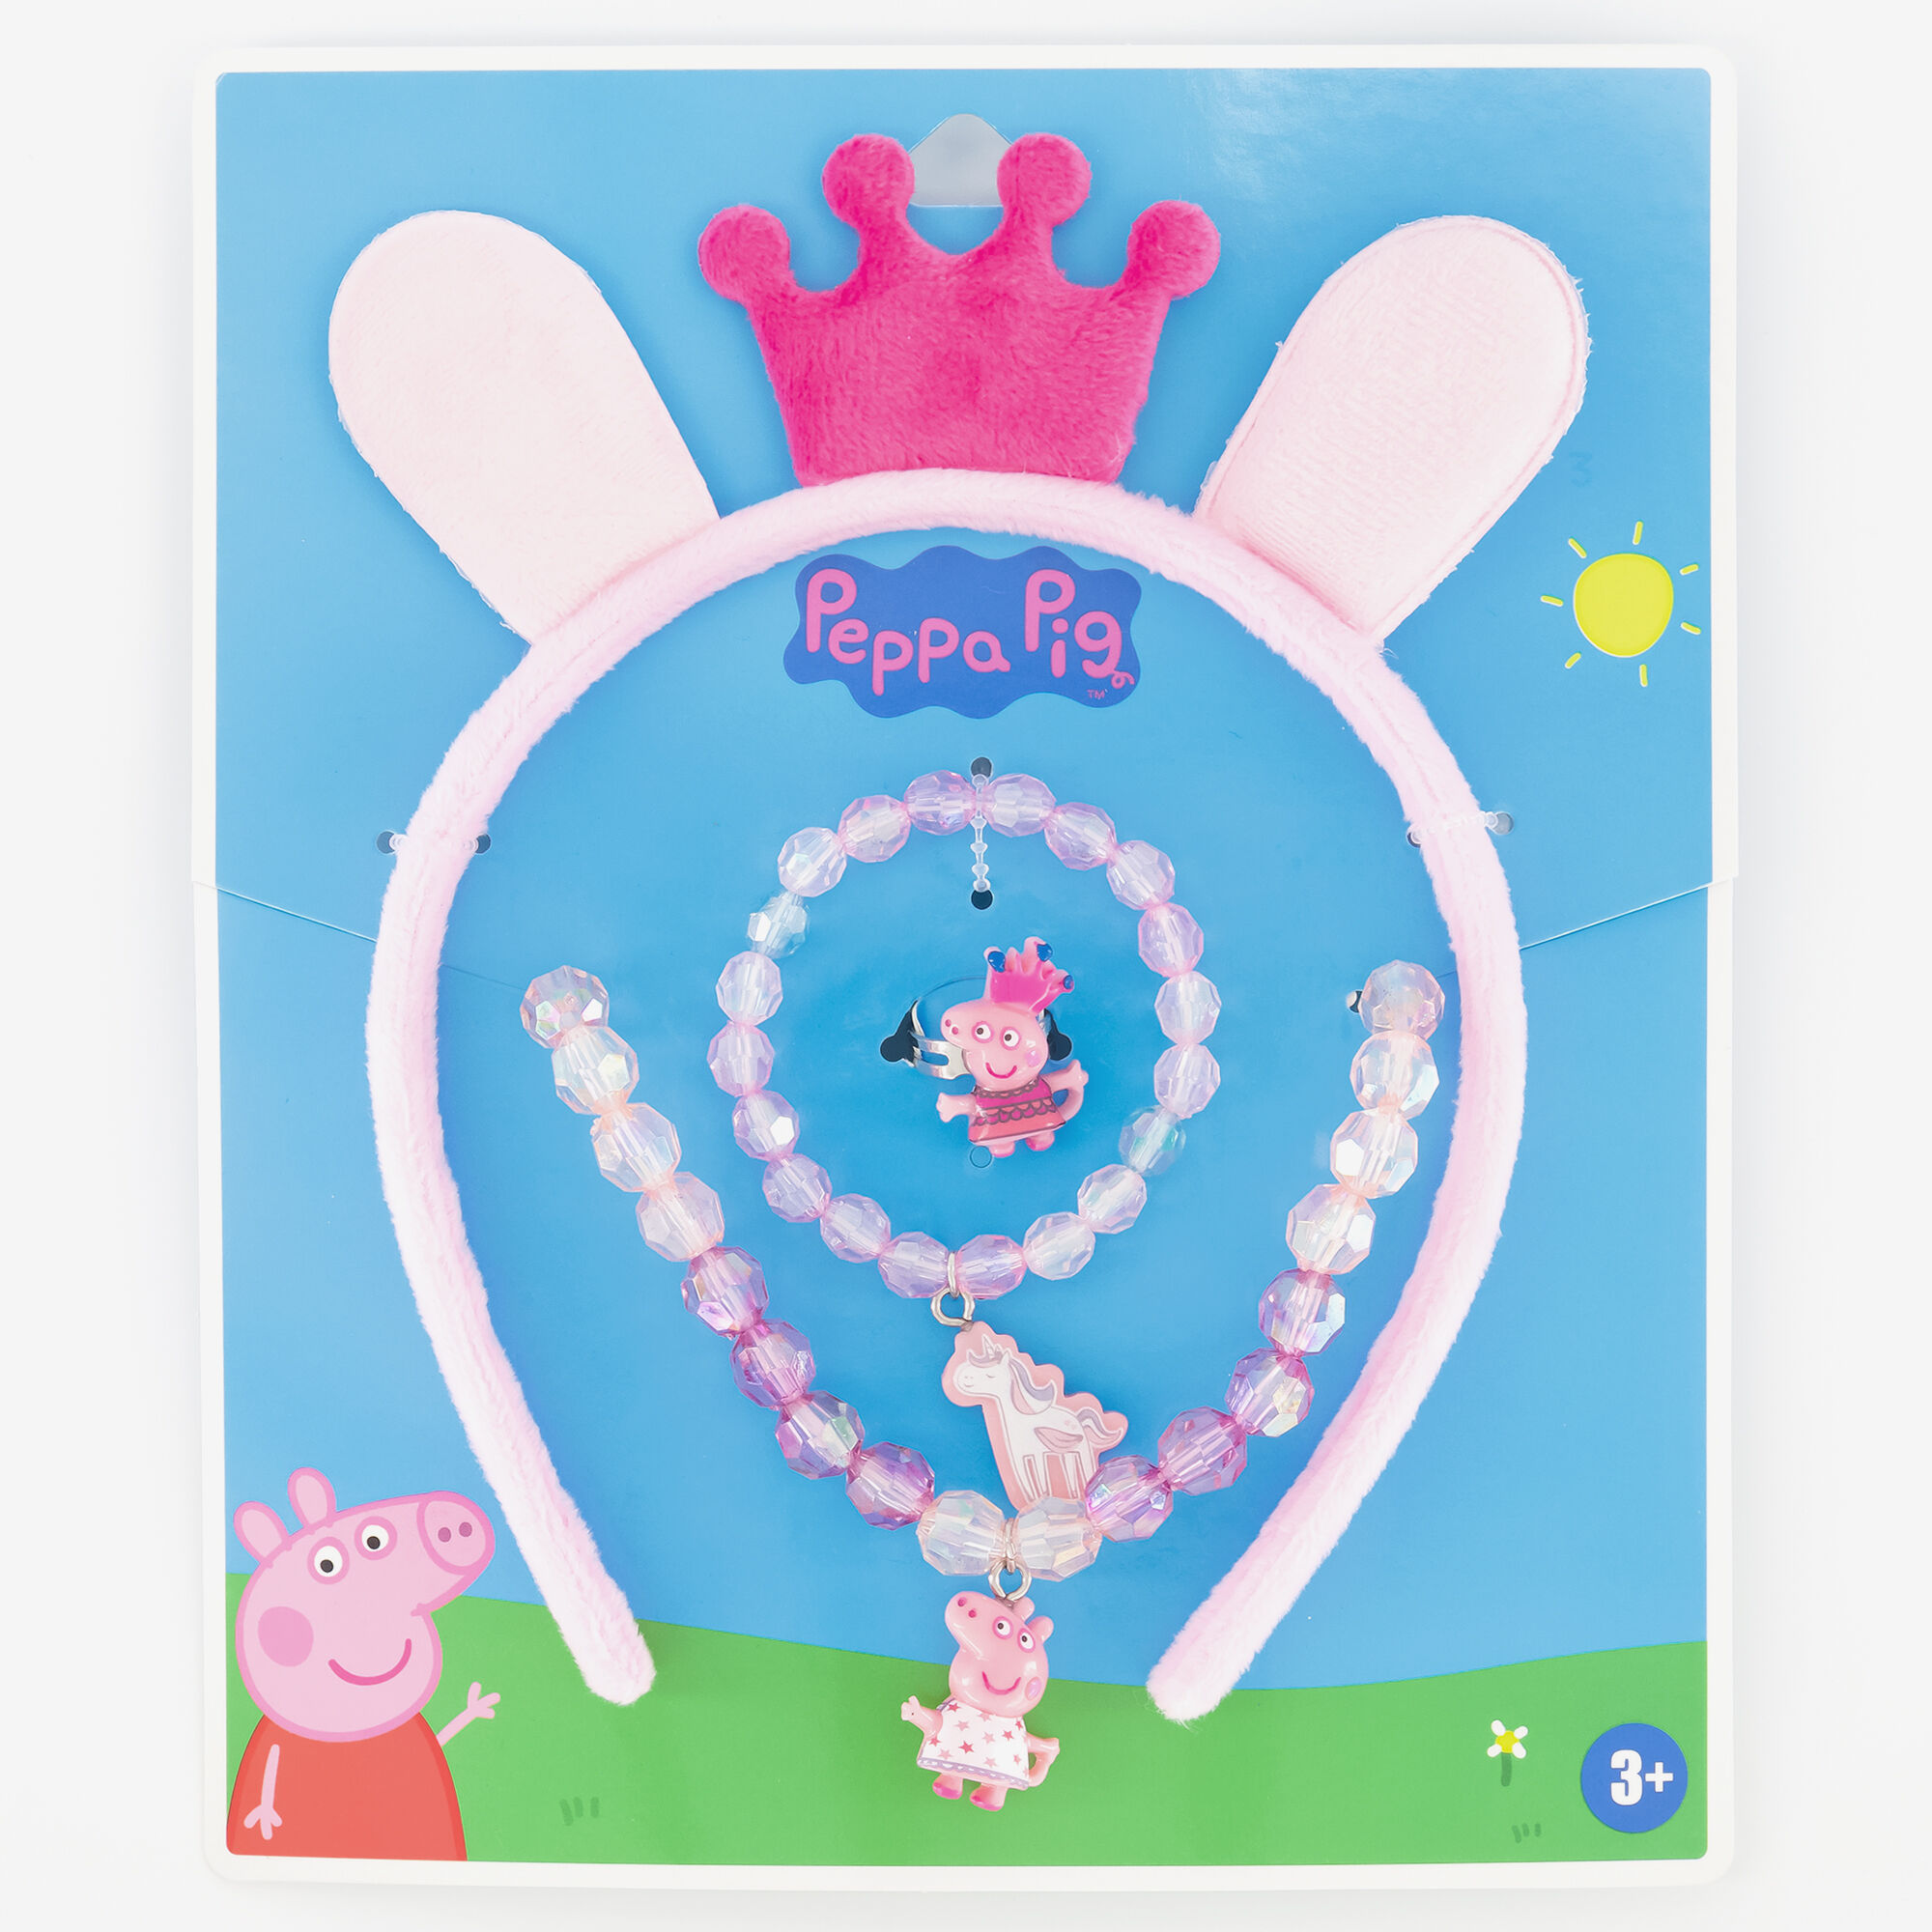 View Claires Peppa Pig Ears Headband And Jewelry Set 4 Pack information